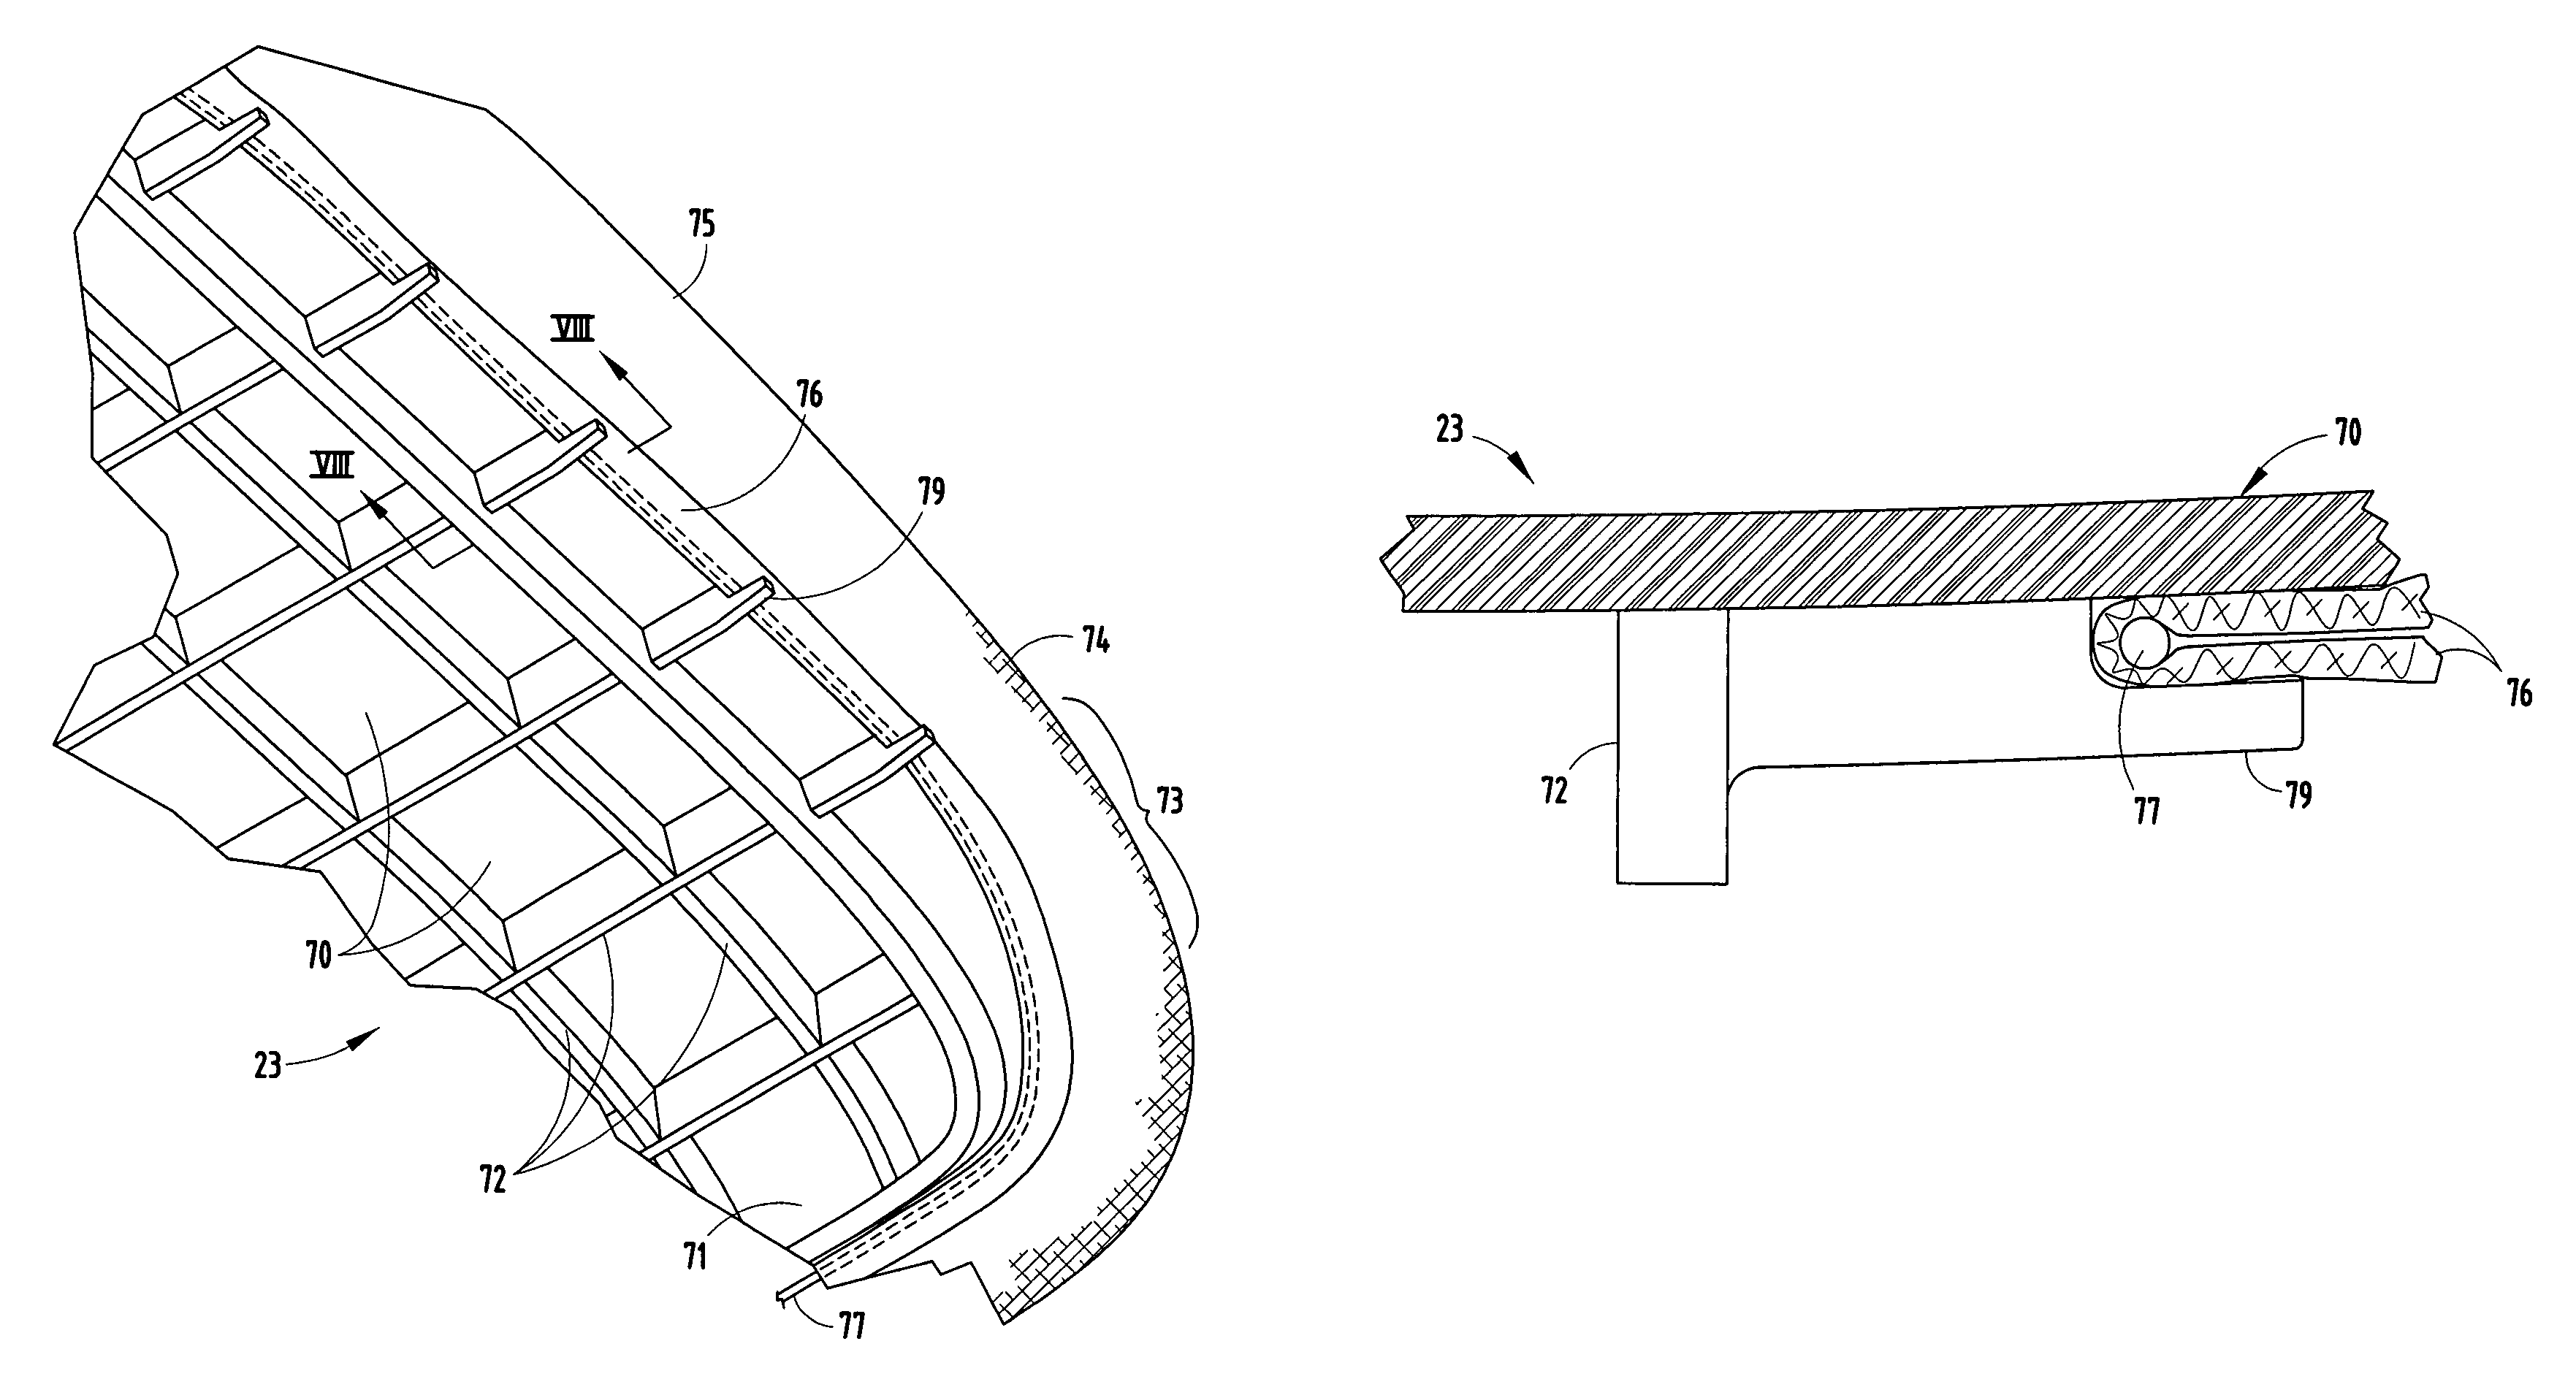 Seating unit with adjustable components